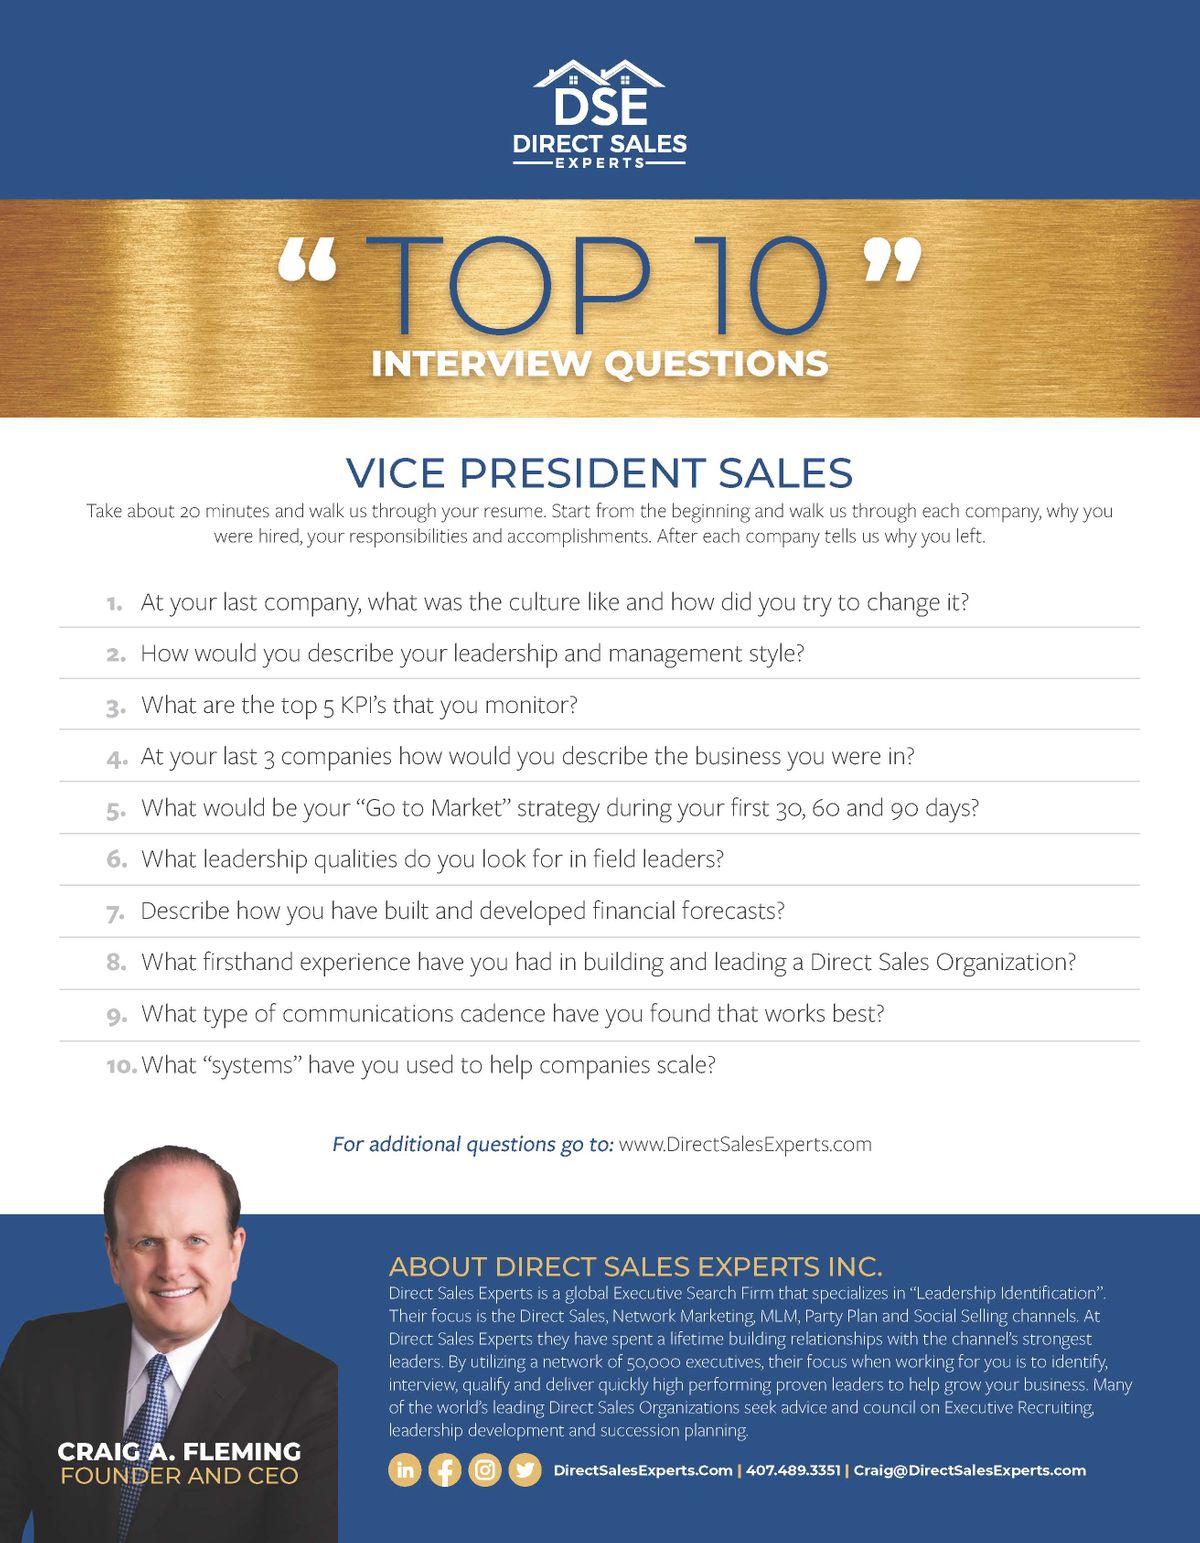 DirectSalesExperts_Top10Flyer(1)_Page_1.jpg